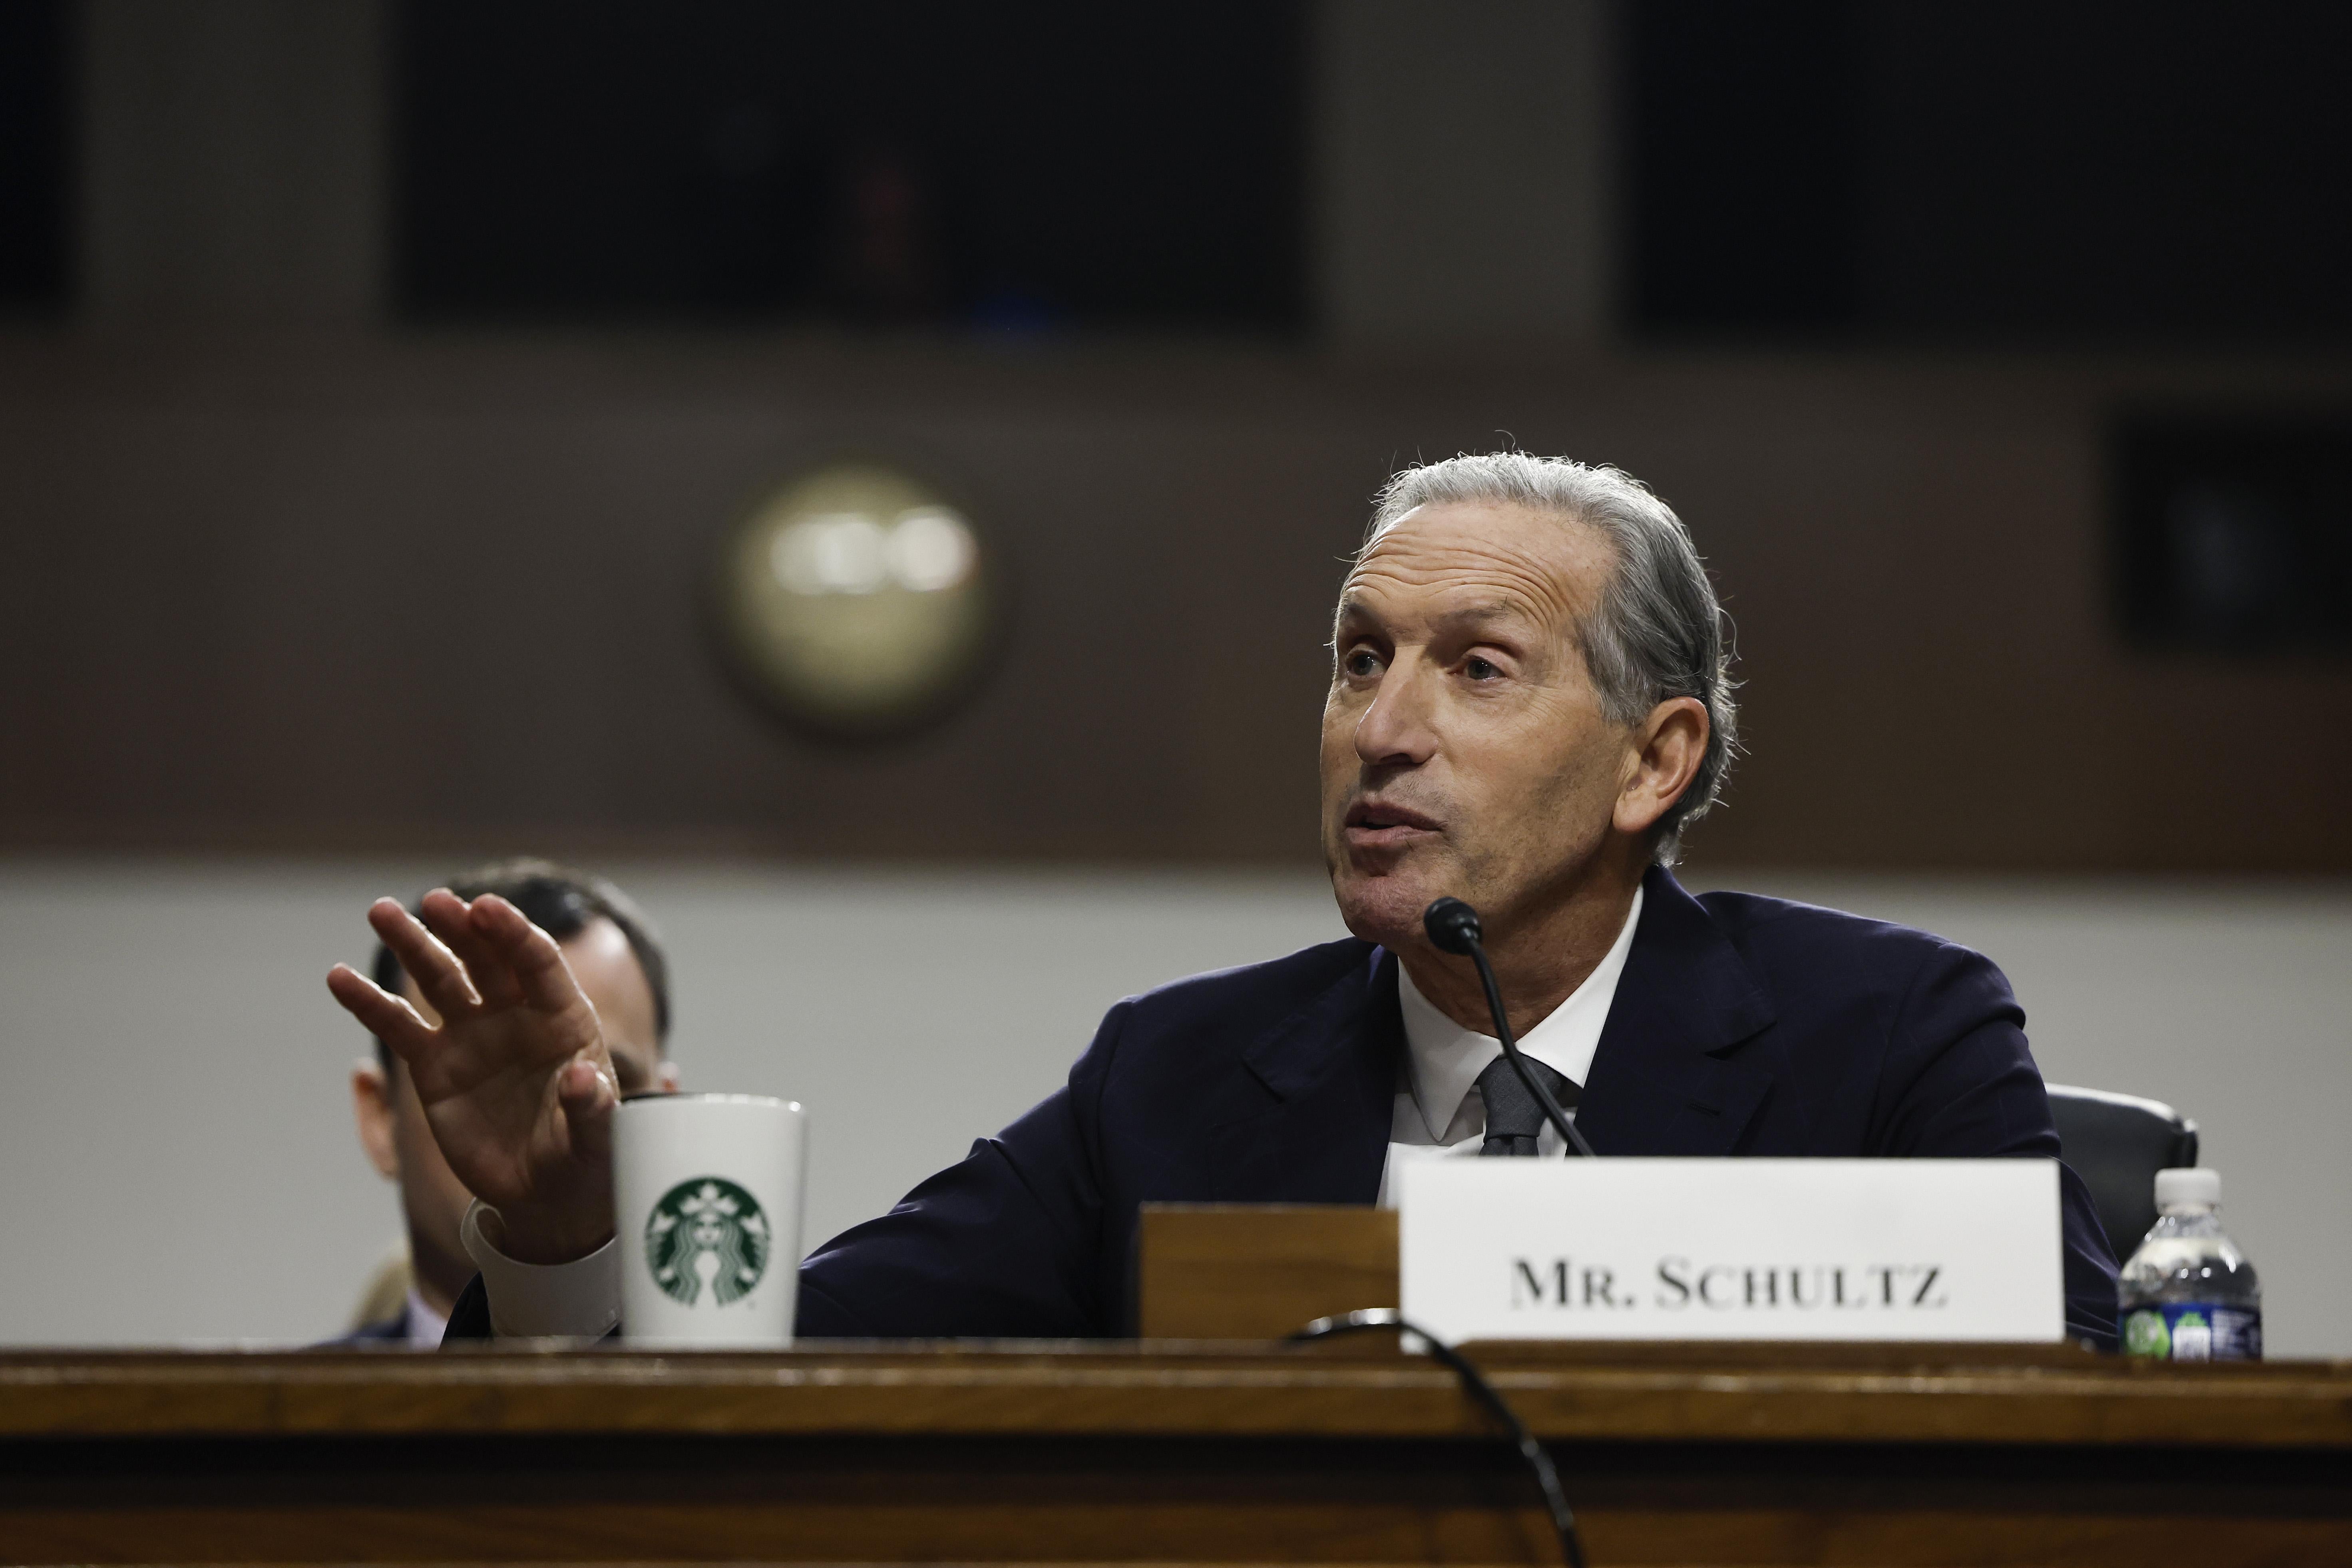 A white man with gray hair, wearing a blue suit, sits at a desk with a Starbucks branded cup next to him. A white placard in front of him reads "Mr. Schultz."